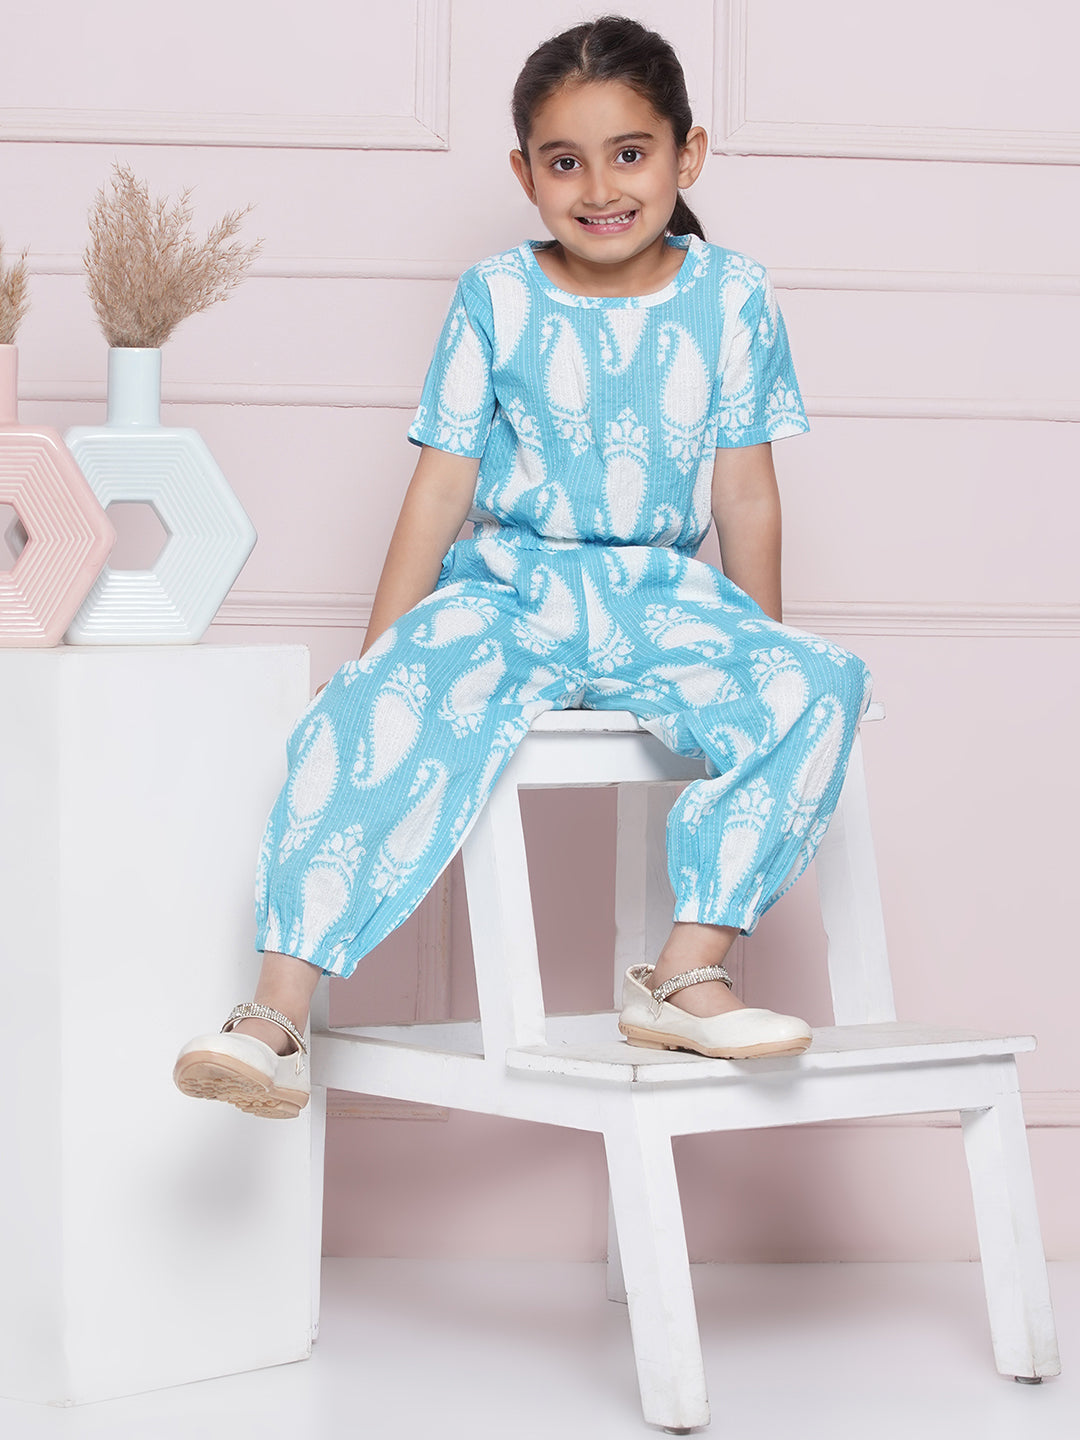 AJ Dezines Half Sleeves Blue Paisley Print Cotton Top and Pant for Girls